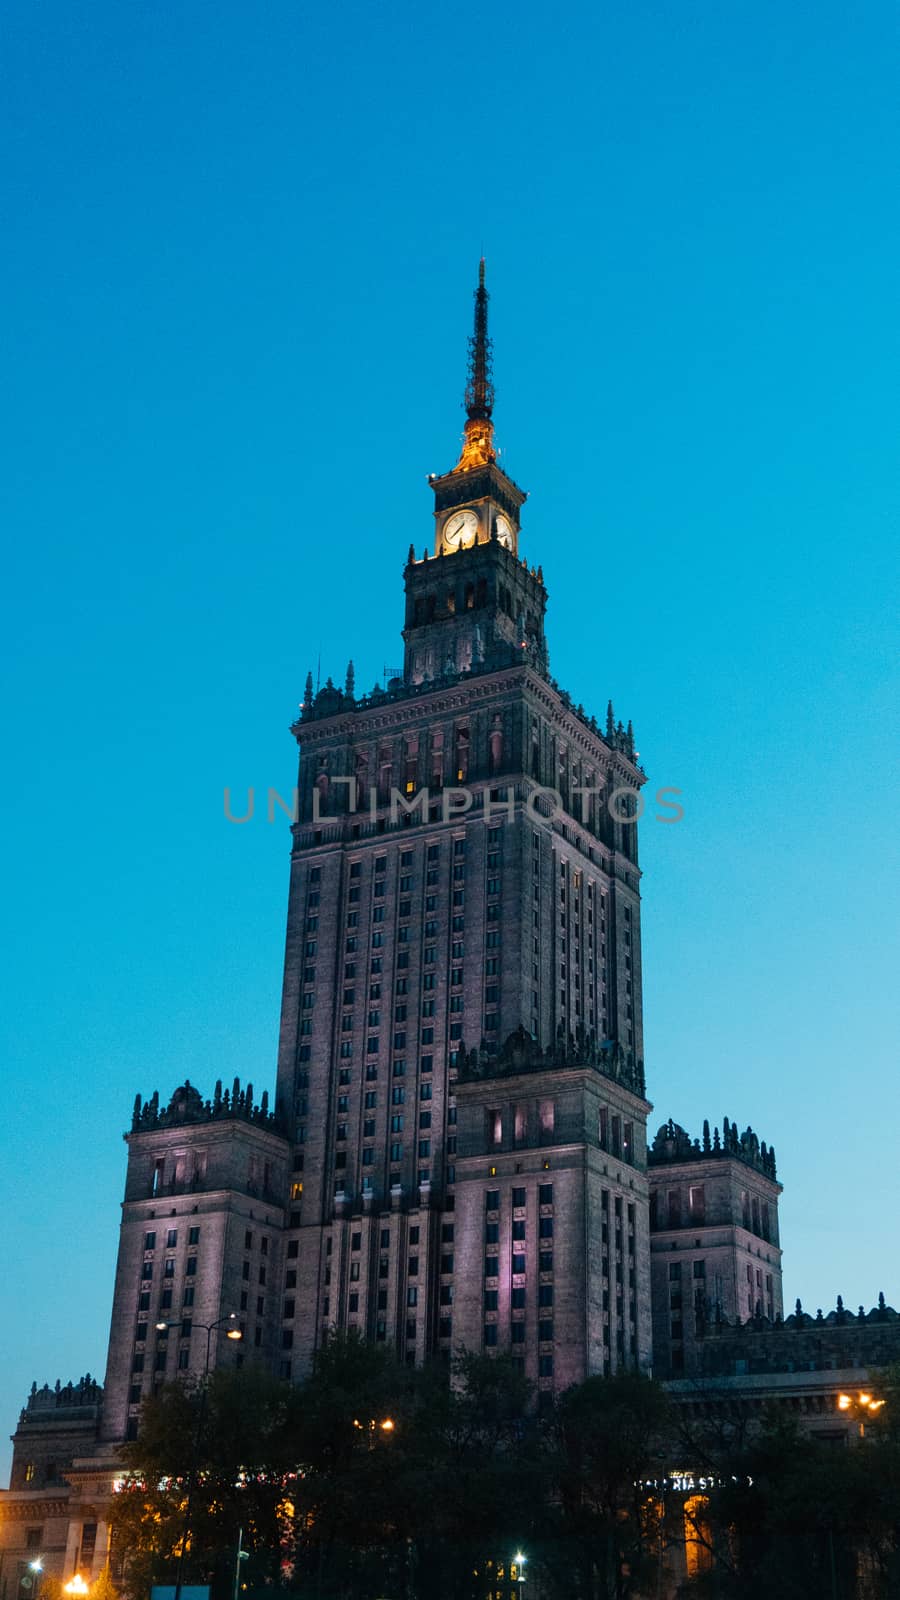 Warsaw, Poland. City center with Palace of Culture and Science, a landmark and symbol of Stalinism and communism, and modern sky scrapers.